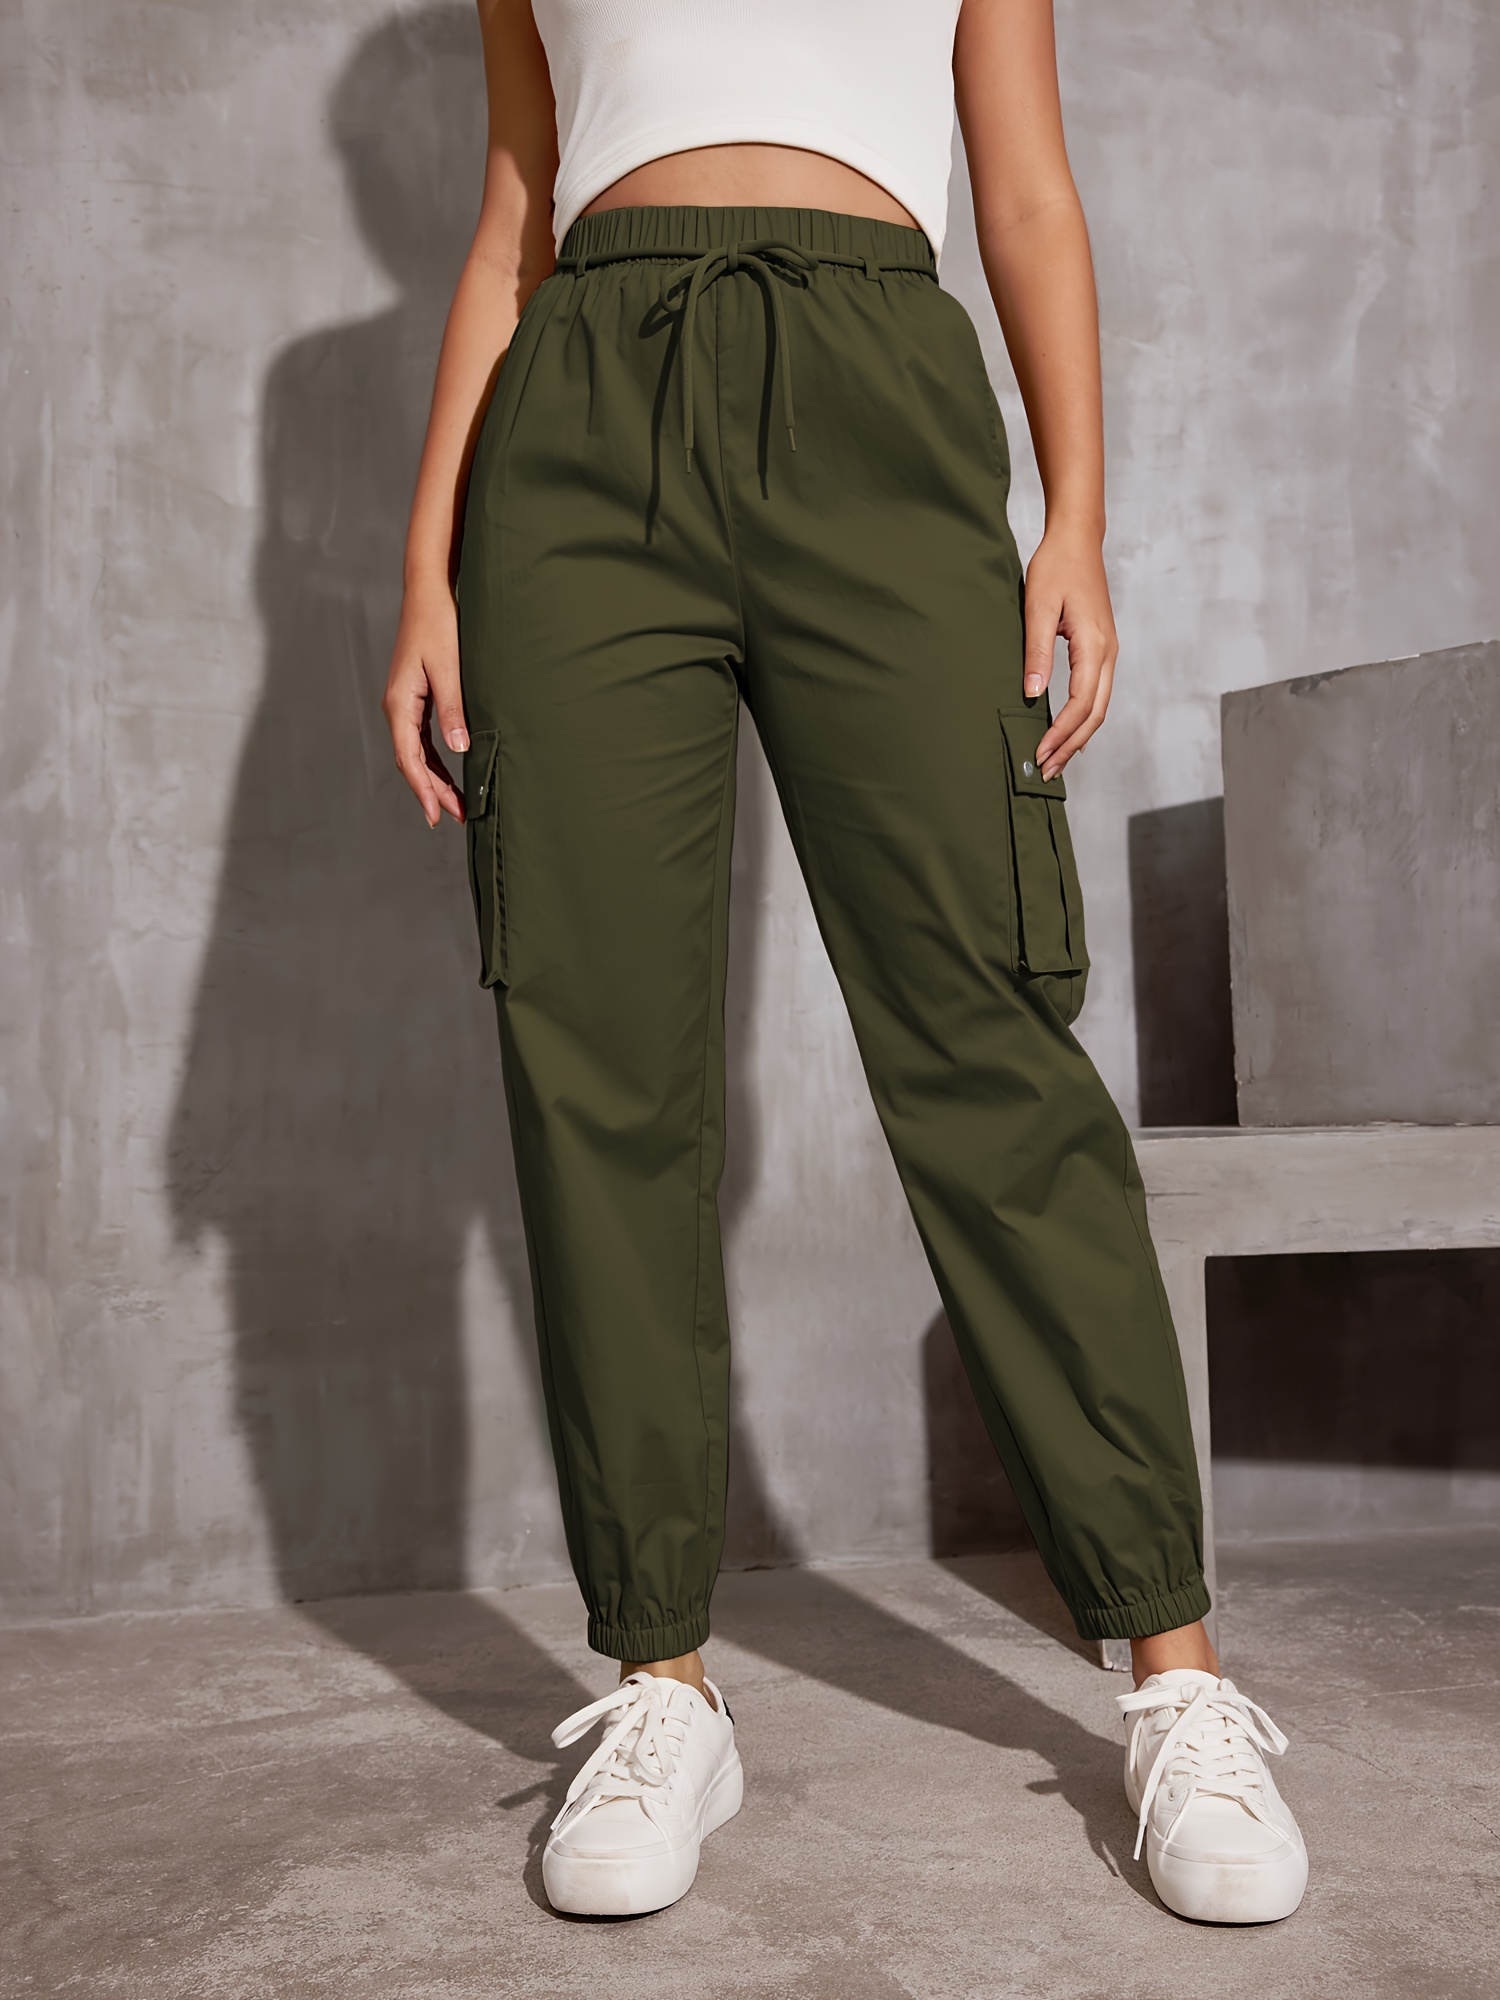 y2k solid pockets drawstring cargo pants casual loose baggy pants for all seasons womens clothing details 2